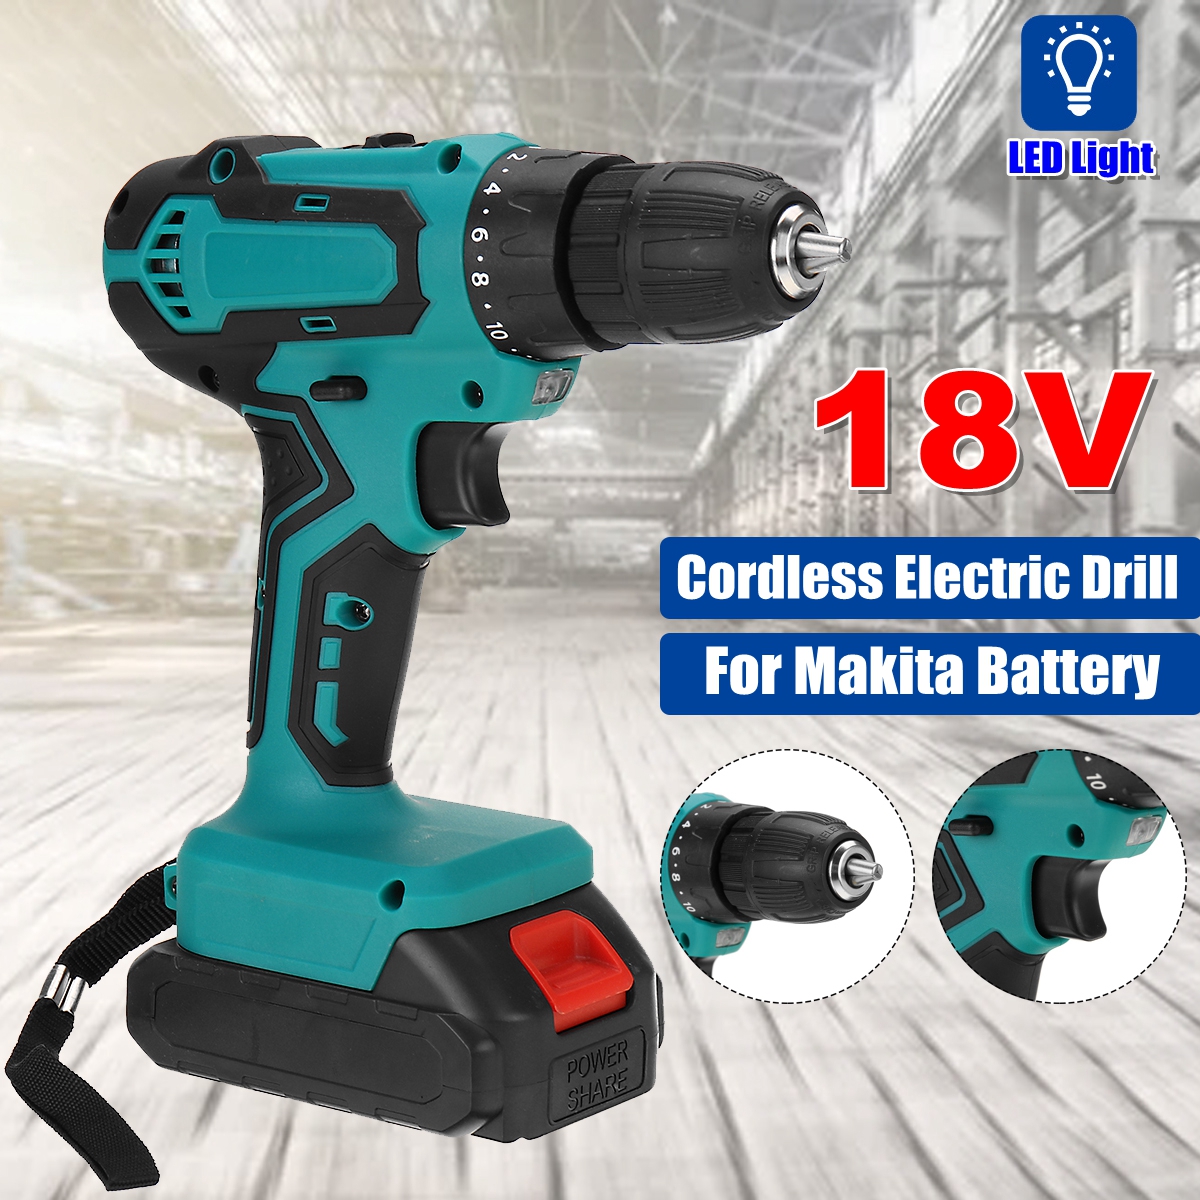 18V-Electric-Drill-10mm--Rechargeable-Cordless-Power-Drills-Adapted-To-Makita-Battery-With-1-Battery-1715109-3